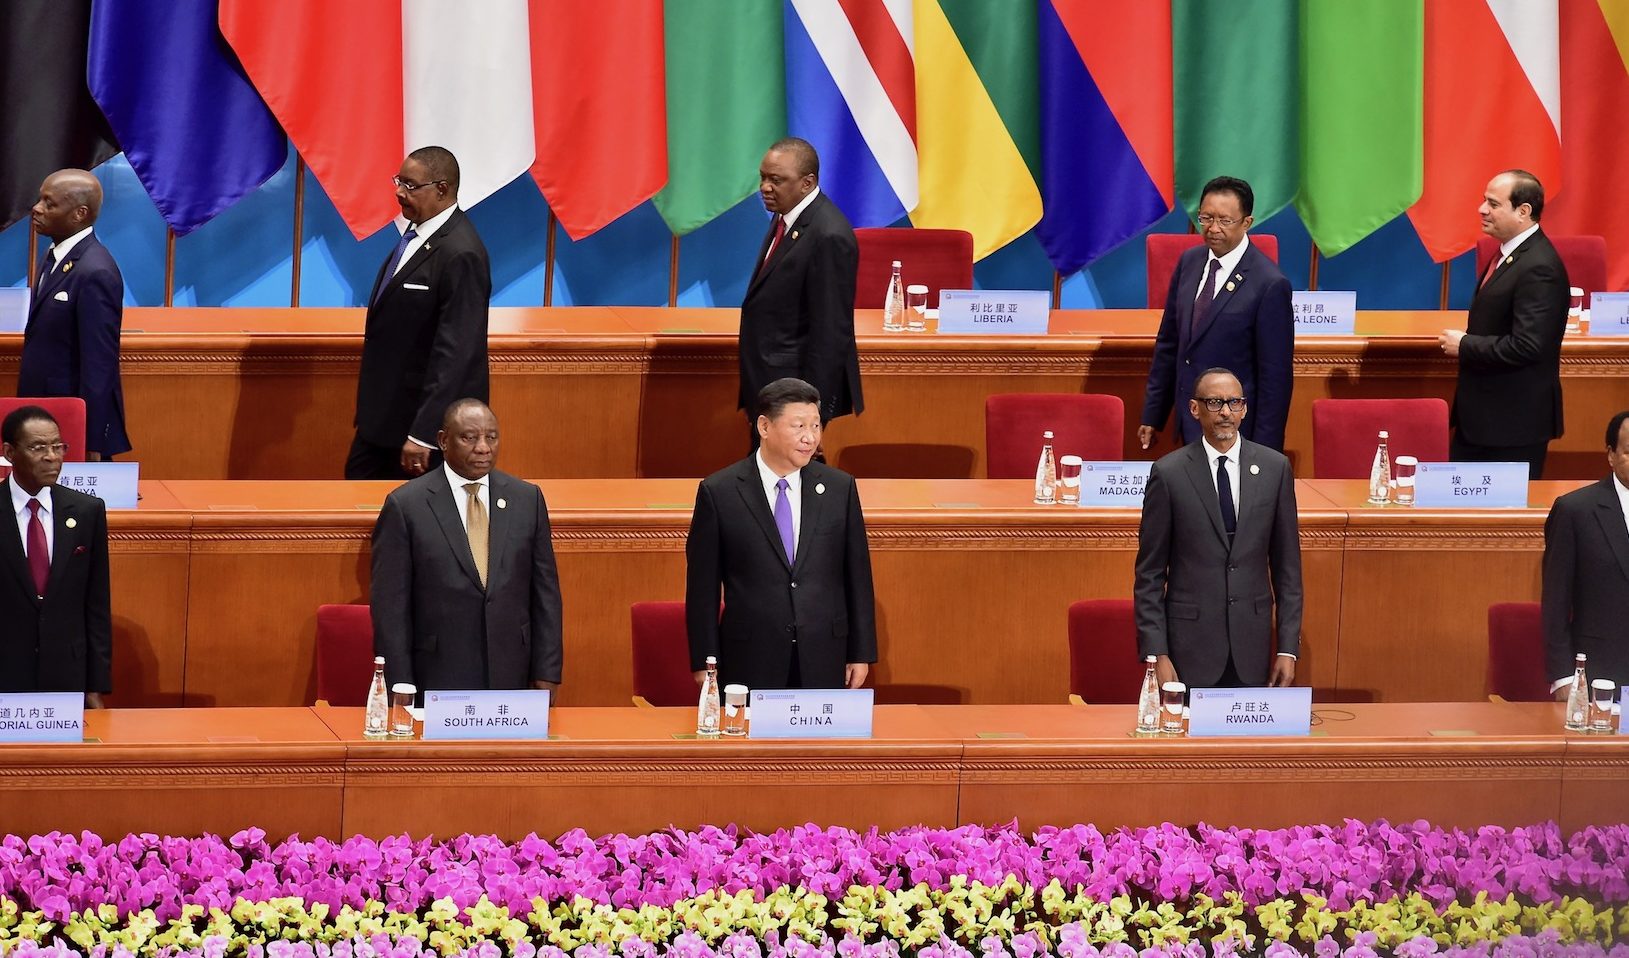 Chinese Communist Party Trains African Leaders, Expanding its Influence